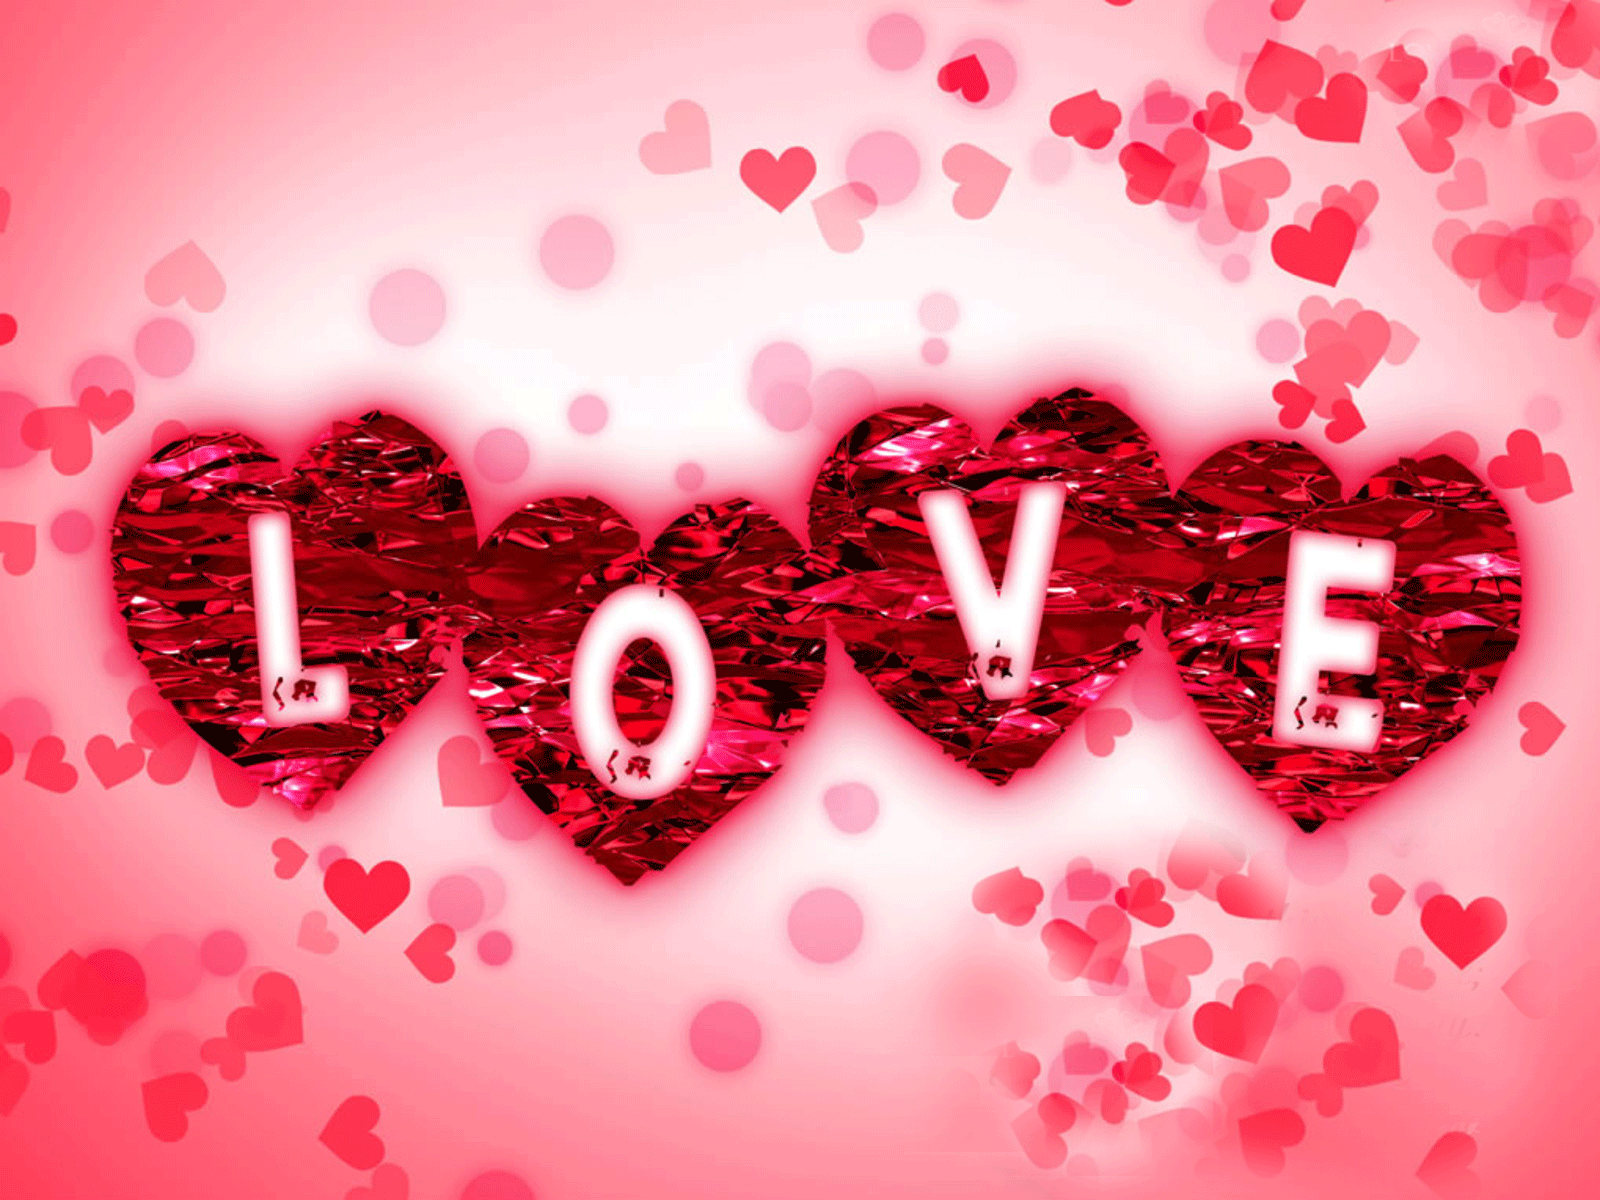 Love Hd Wallpaper Love Heart Picture Love Pictures Love HD Wallpapers Download Free Images Wallpaper [wallpaper981.blogspot.com]